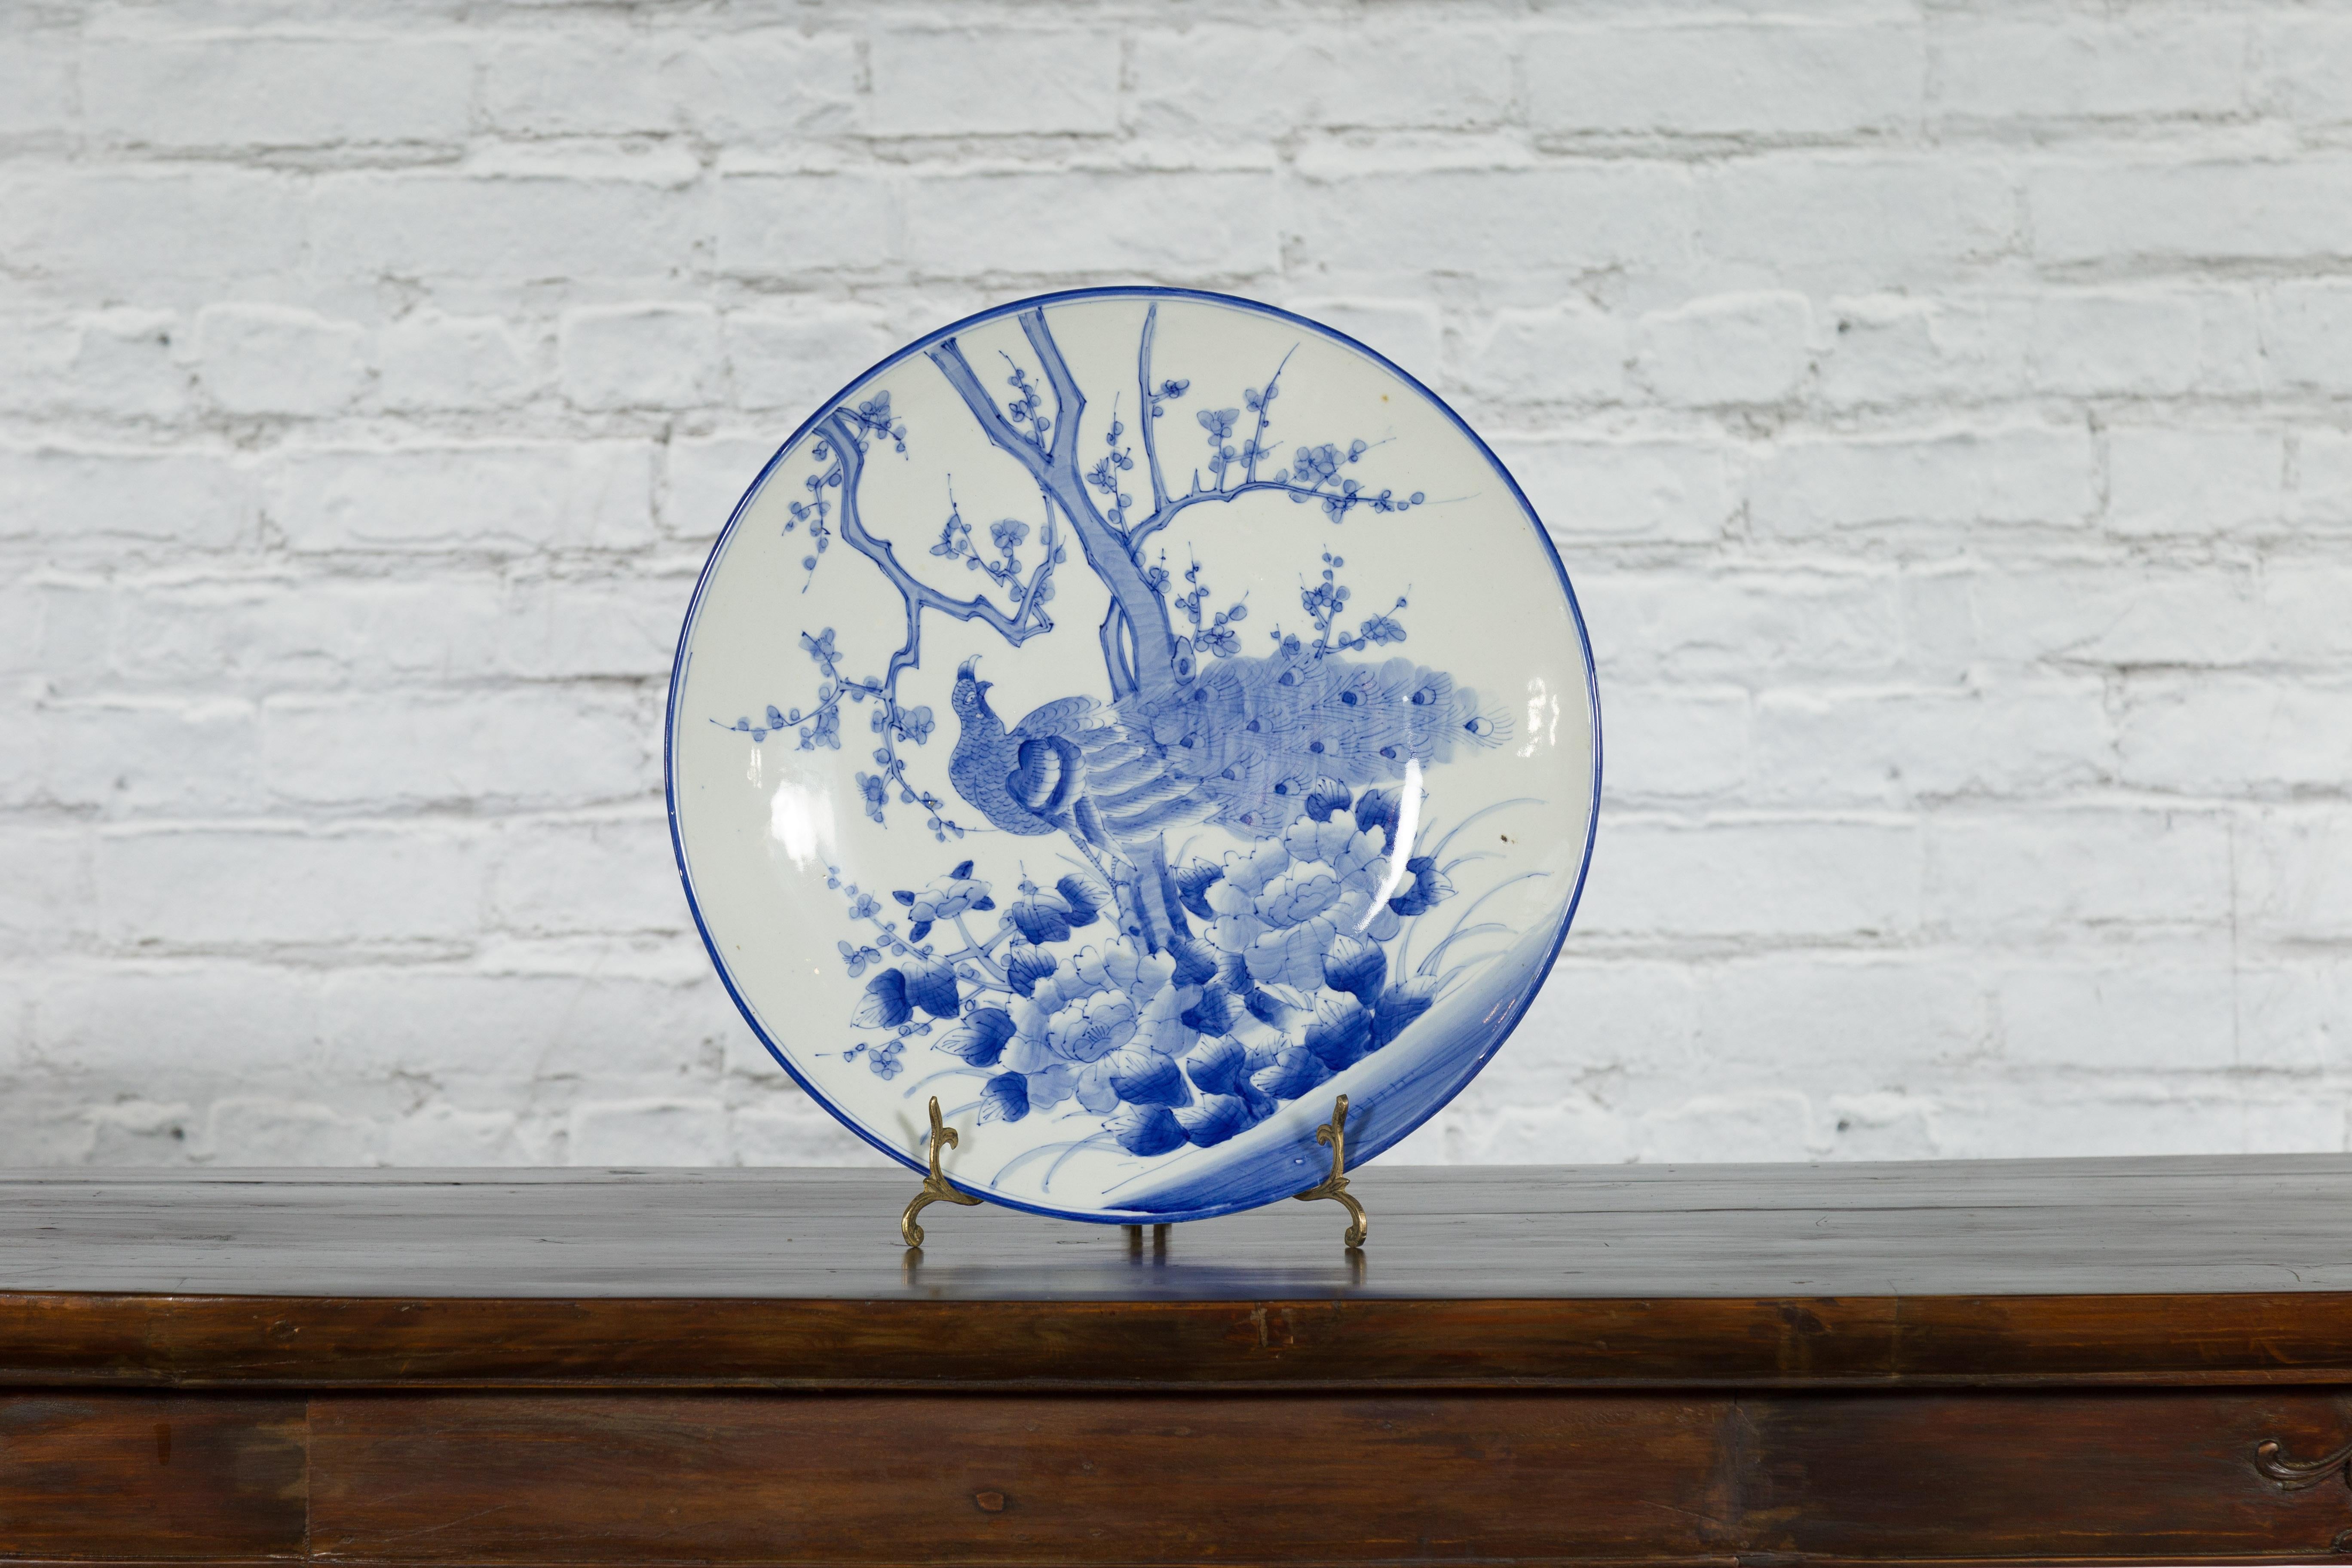 A Japanese porcelain charger plate from the 19th century, with hand-painted blue and white blooming tree, flowers, foliage and peacock décor. Created in Japan during the 19th century, this porcelain plate features a delicate blue and white décor